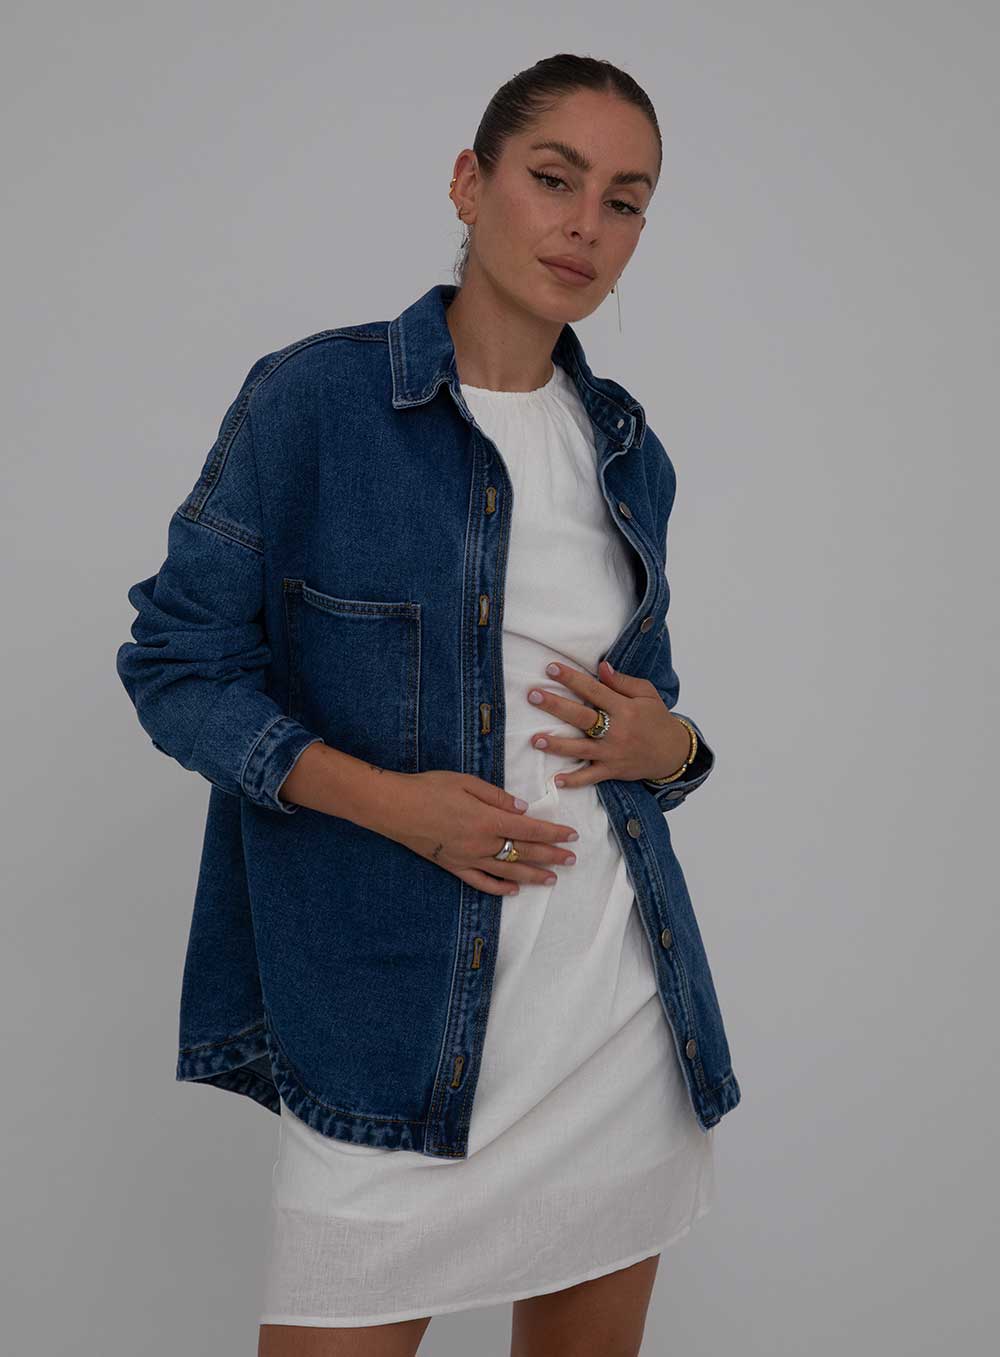 The Wake Up Denim Jacket in dark blue features full button through front, collar at the neck line, 2 large chest pockets, 2 side pockets, functional button down cuff adn scoop hem.